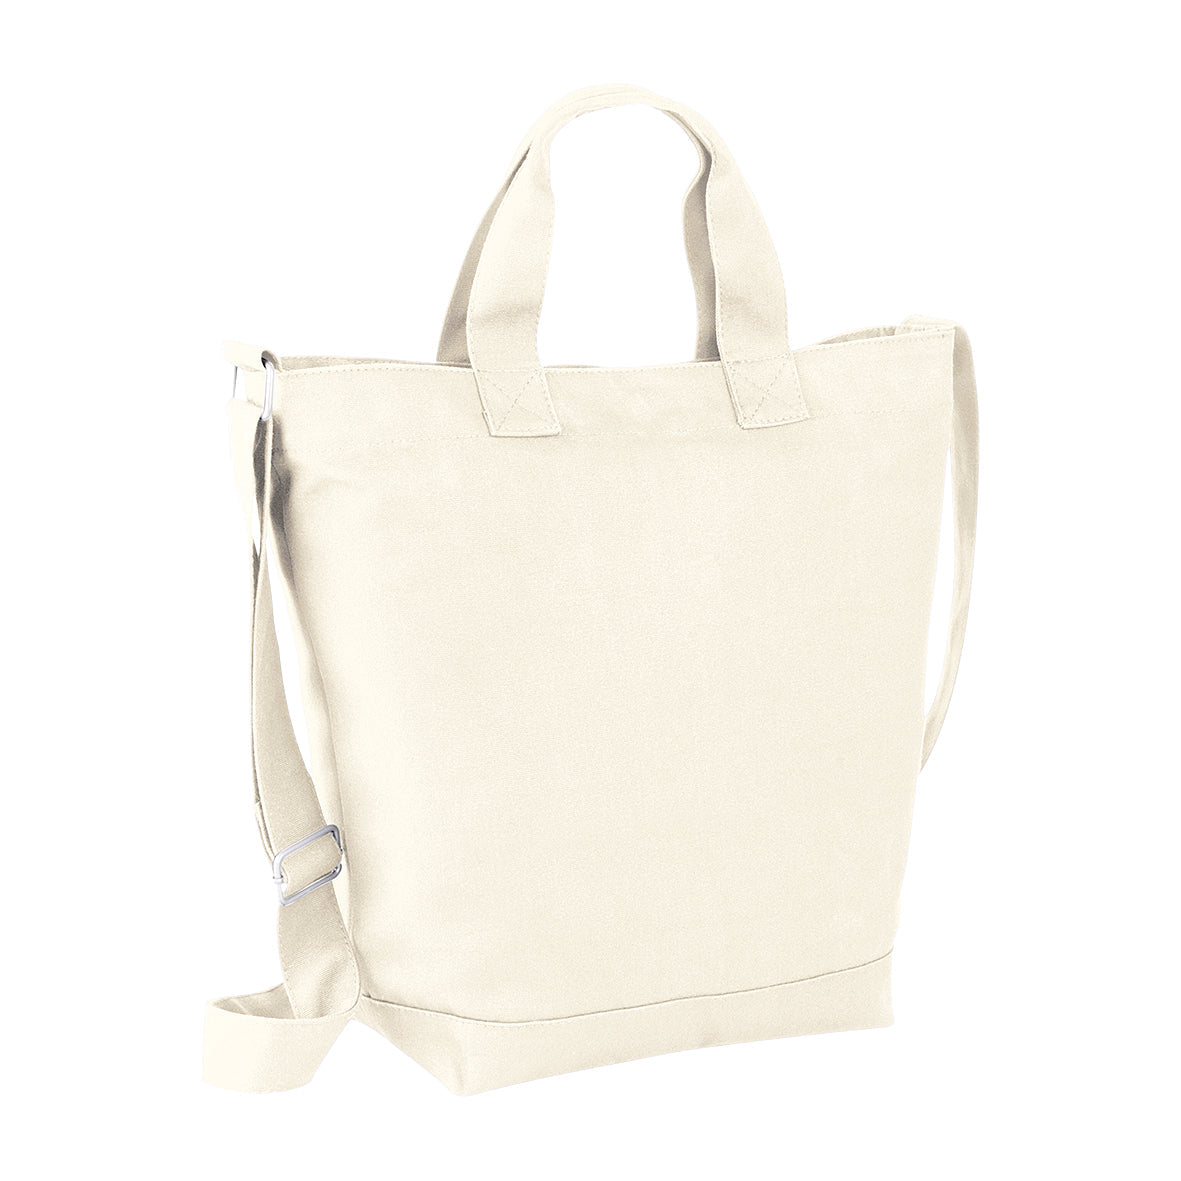 Bagbase Canvas Day Bag